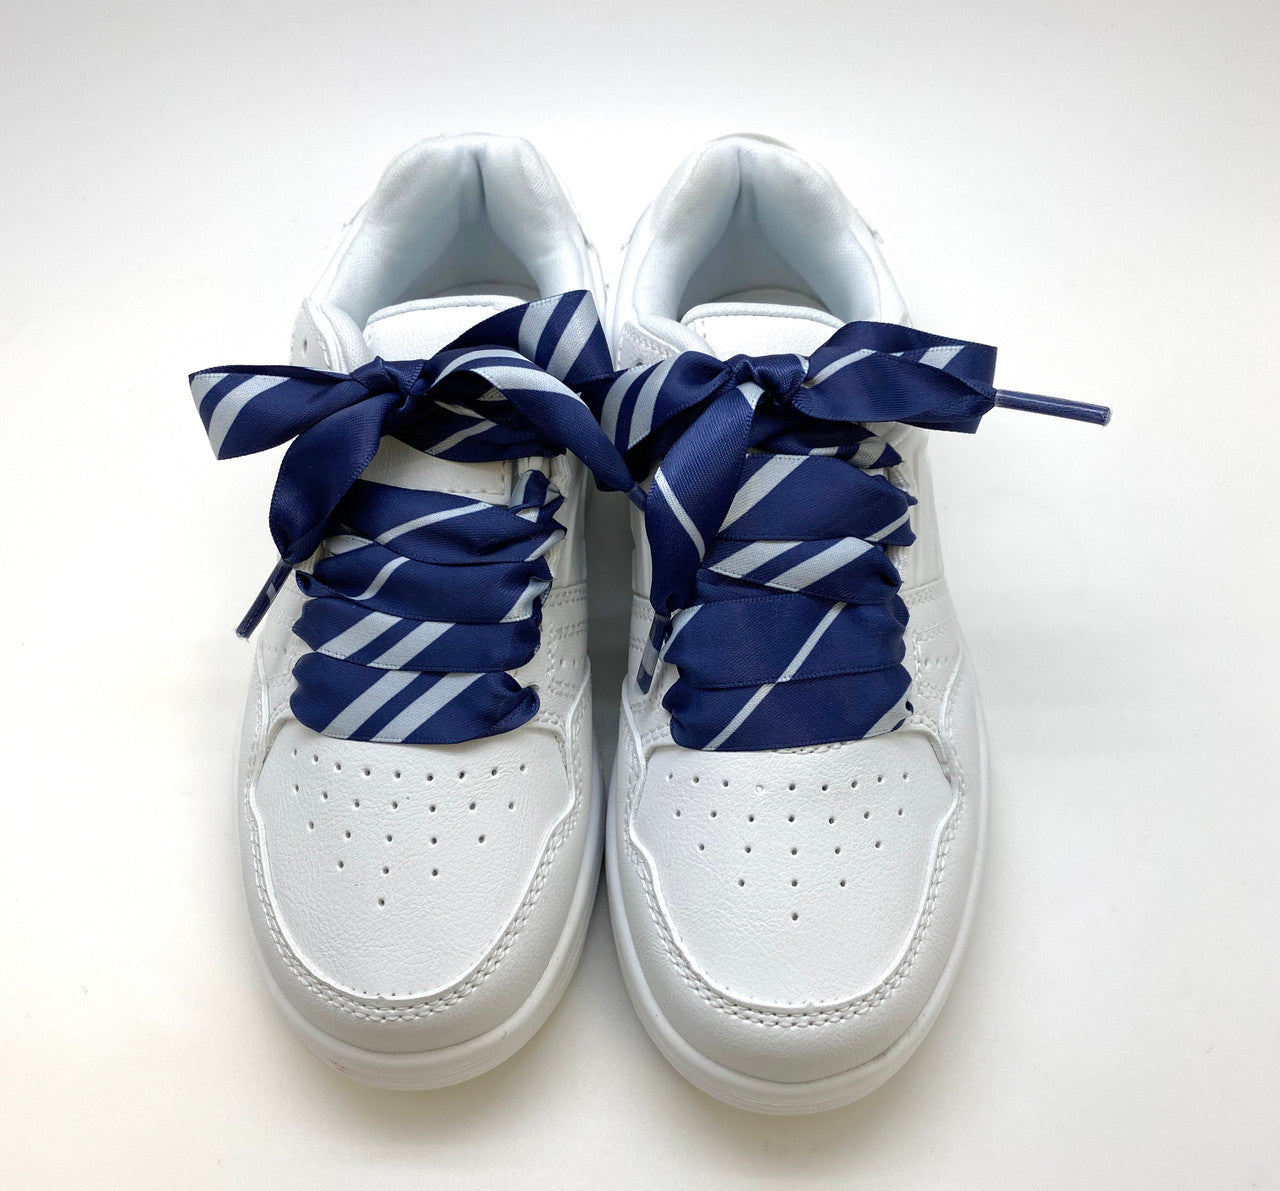 Satin shoelaces tie navy blue and silver stripe design is perfect for adding some fun and fashion to your sneakers! This is a great shoelace for fun dance shoes, wedding shoes, cheerleading and recitals! All our ribbon shoelaces are printed using dye sublimation technology and can be washed, ironed and re-used! All our laces are designed and printed in the USA